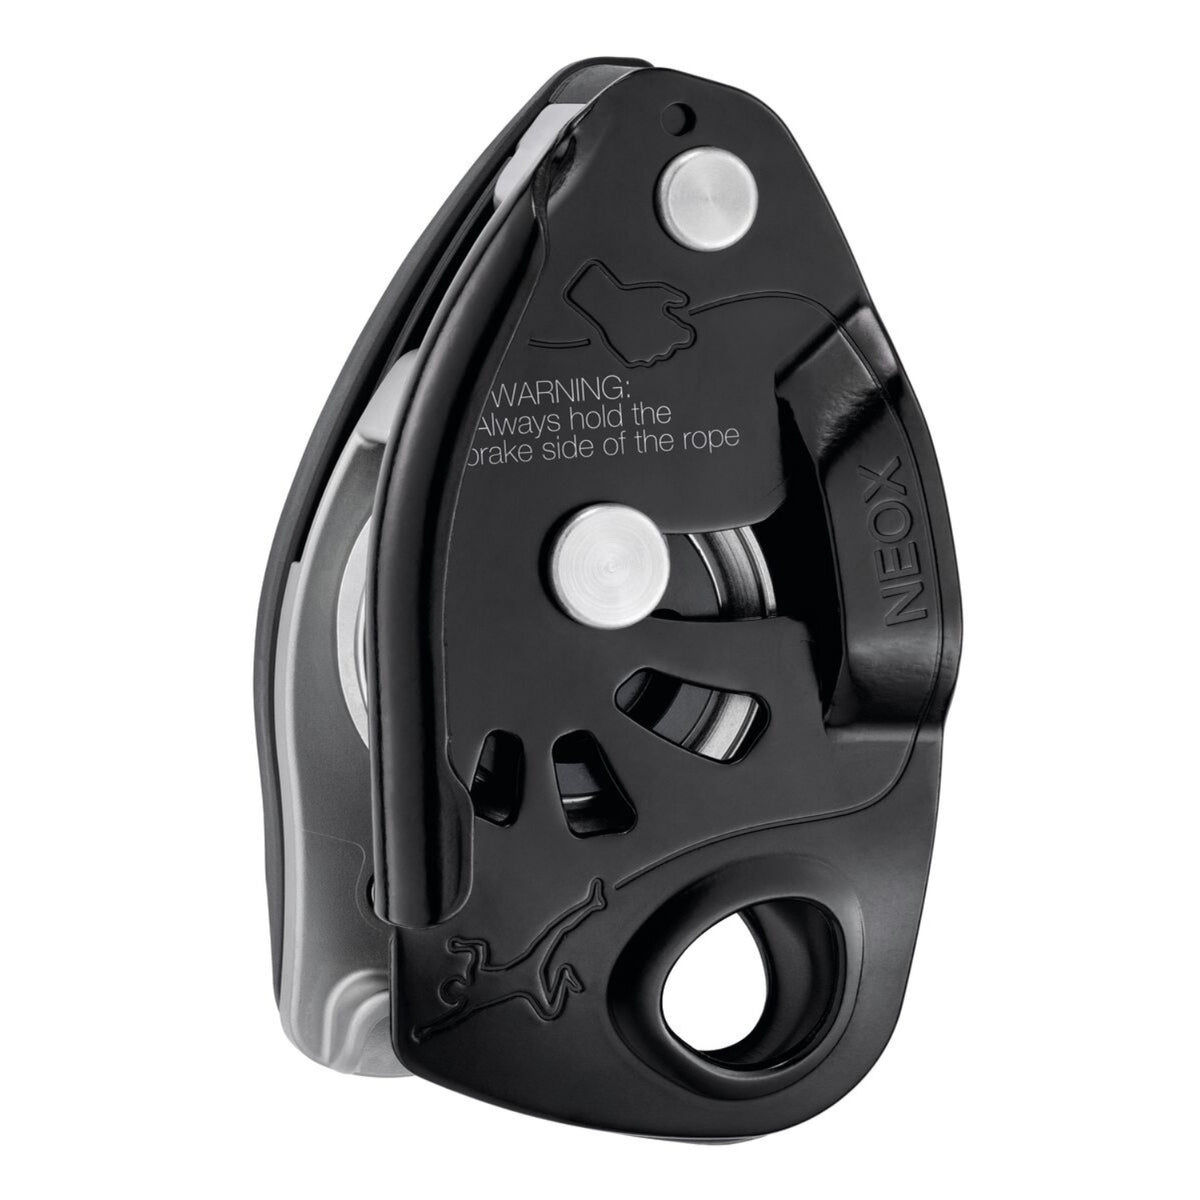 Petzl Neox black assisted belay device